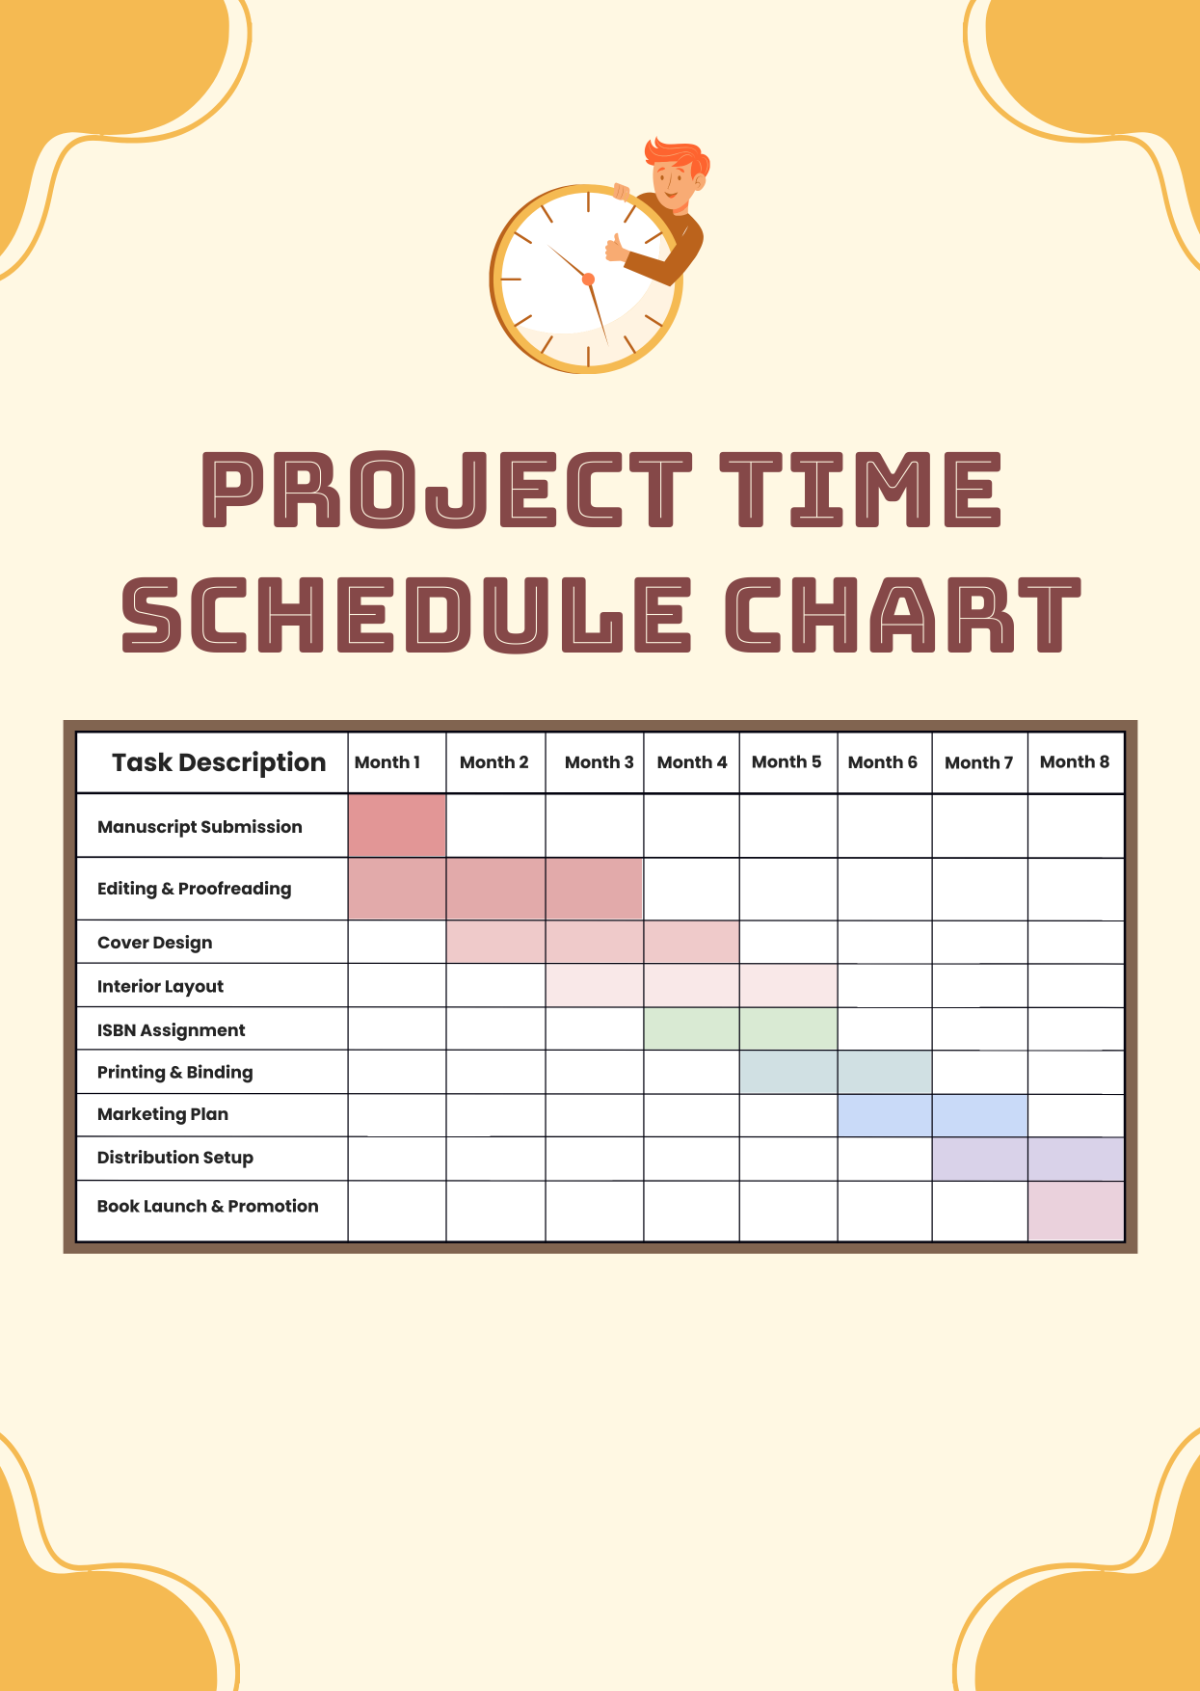 Project Time Schedule Chart